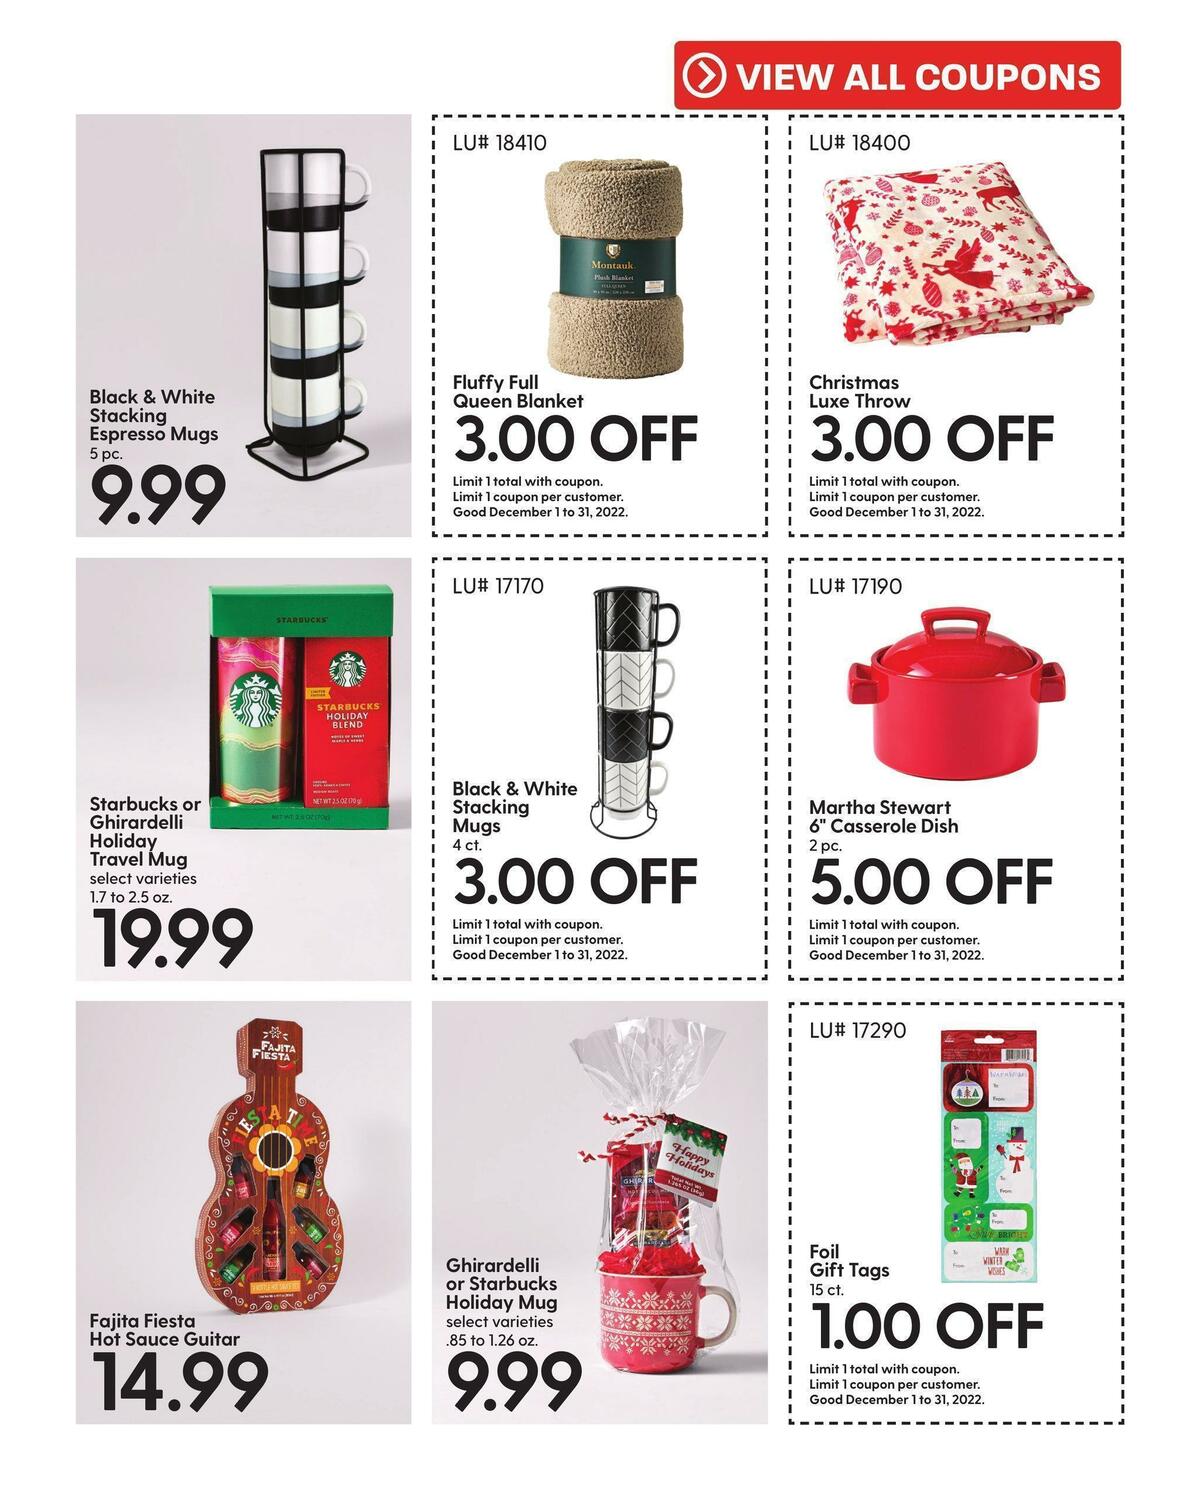 Hy-Vee December Mega Coupon Book Weekly Ad from December 1